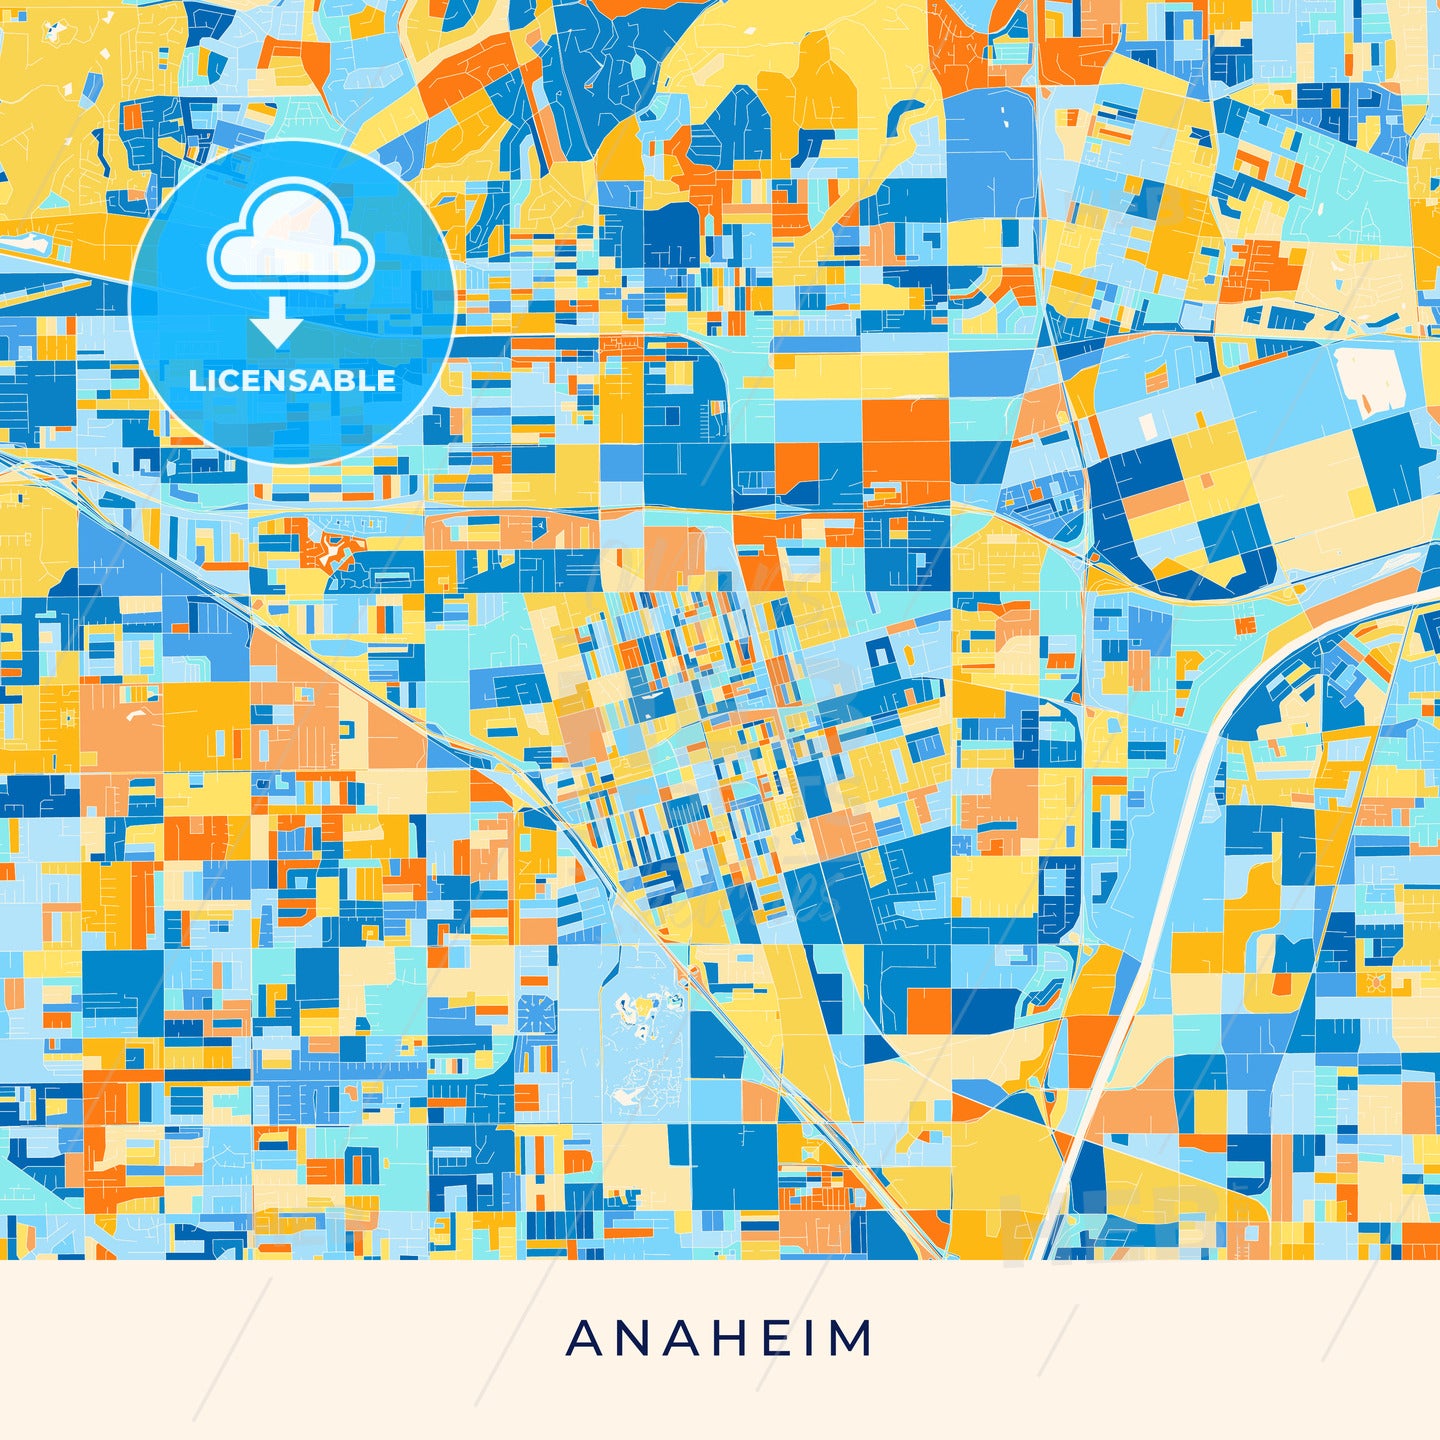 Anaheim colorful map poster template